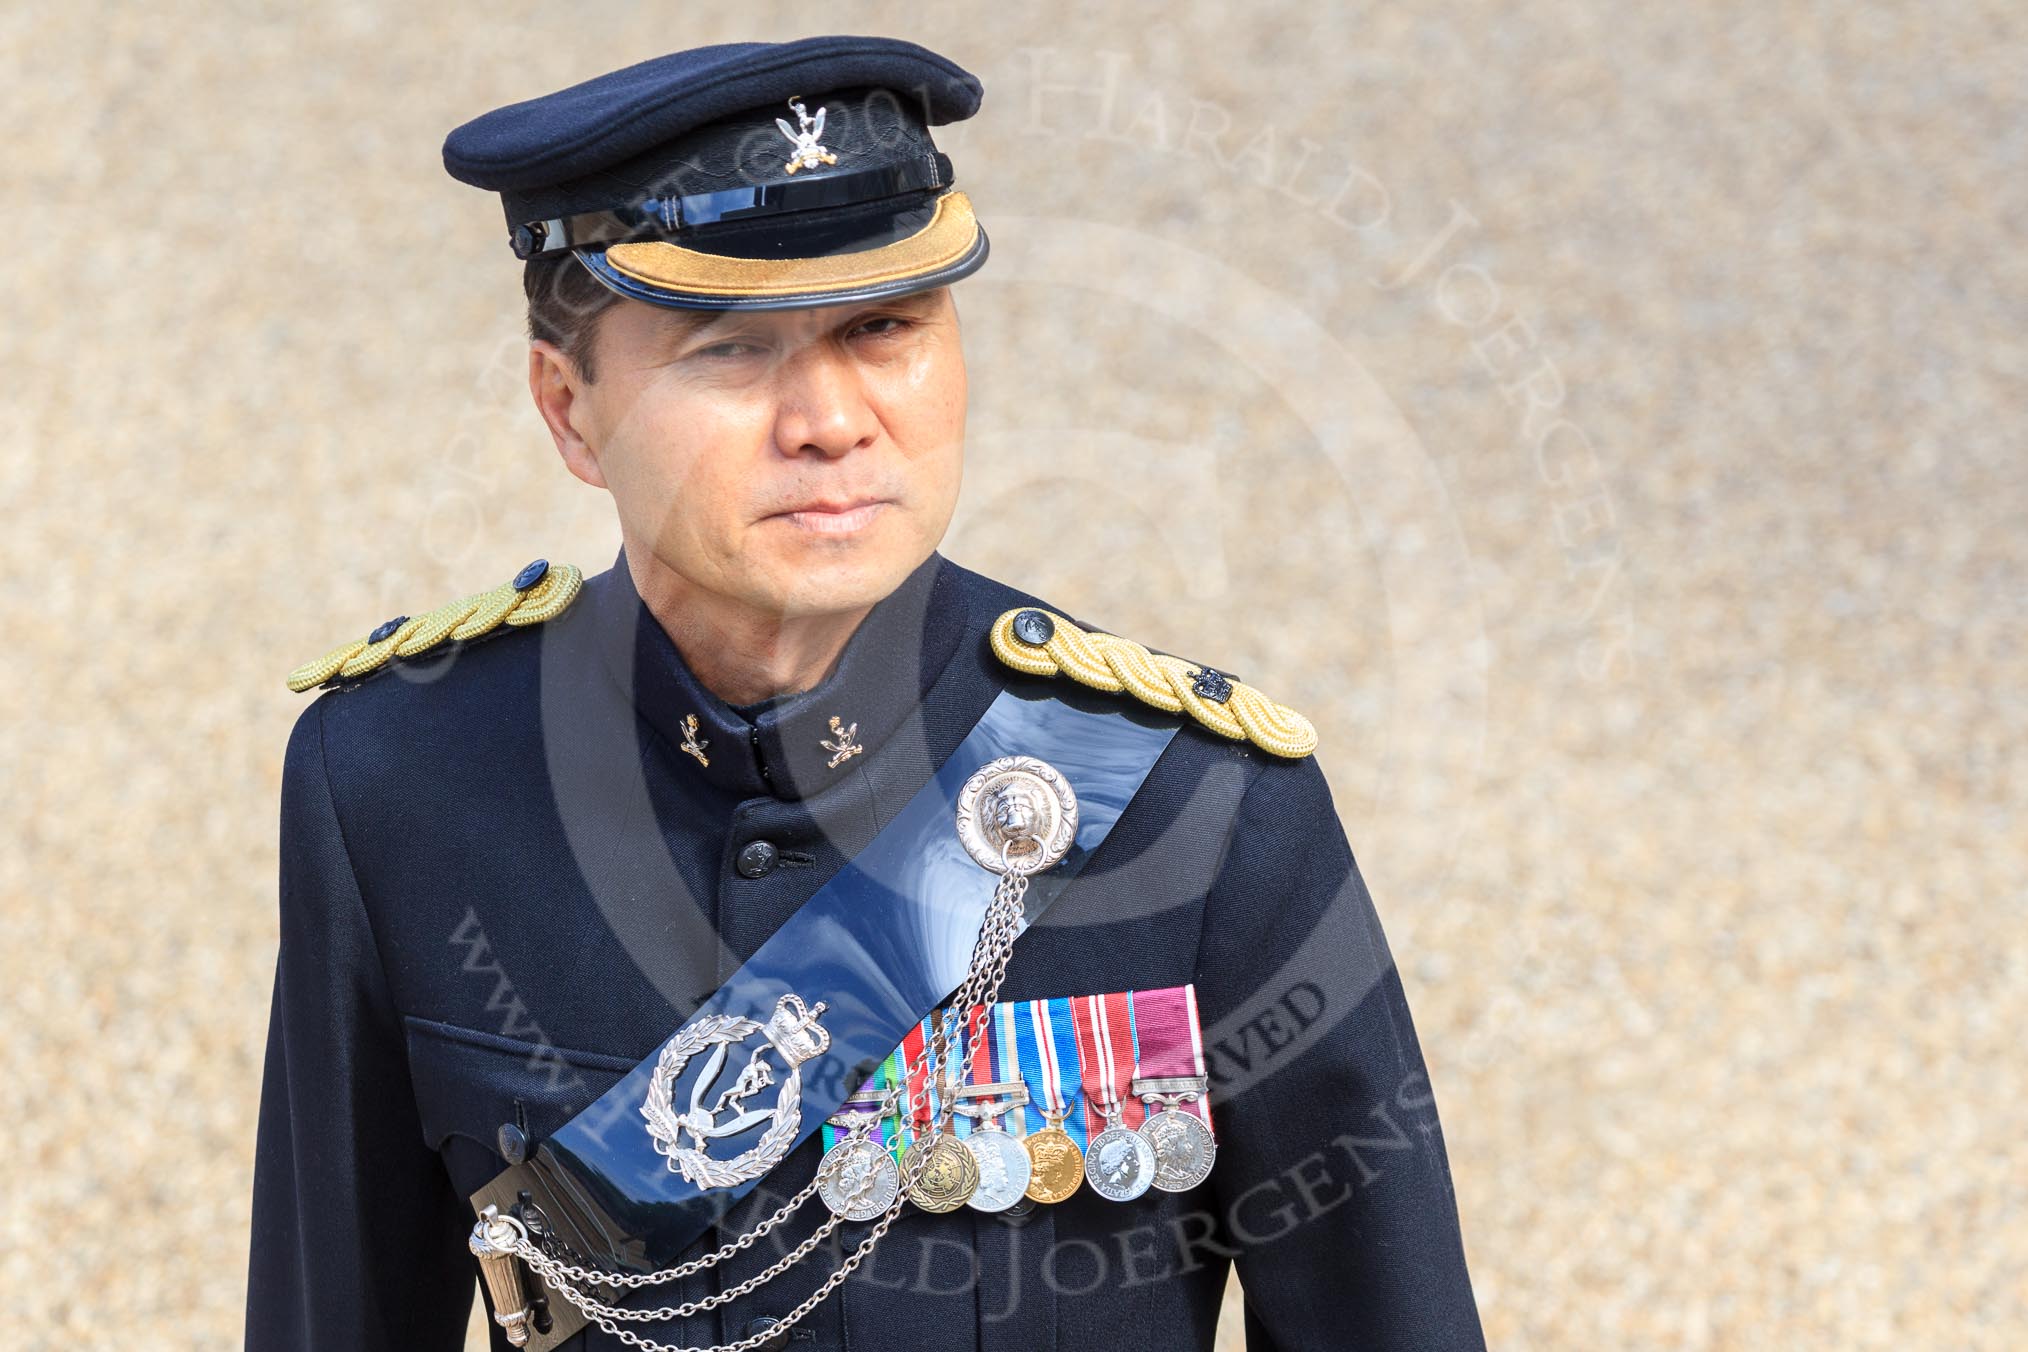 A Major of the Queen's Gurkha Signals before Trooping the Colour 2018, The Queen's Birthday Parade at Horse Guards Parade, Westminster, London, 9 June 2018, 10:07.